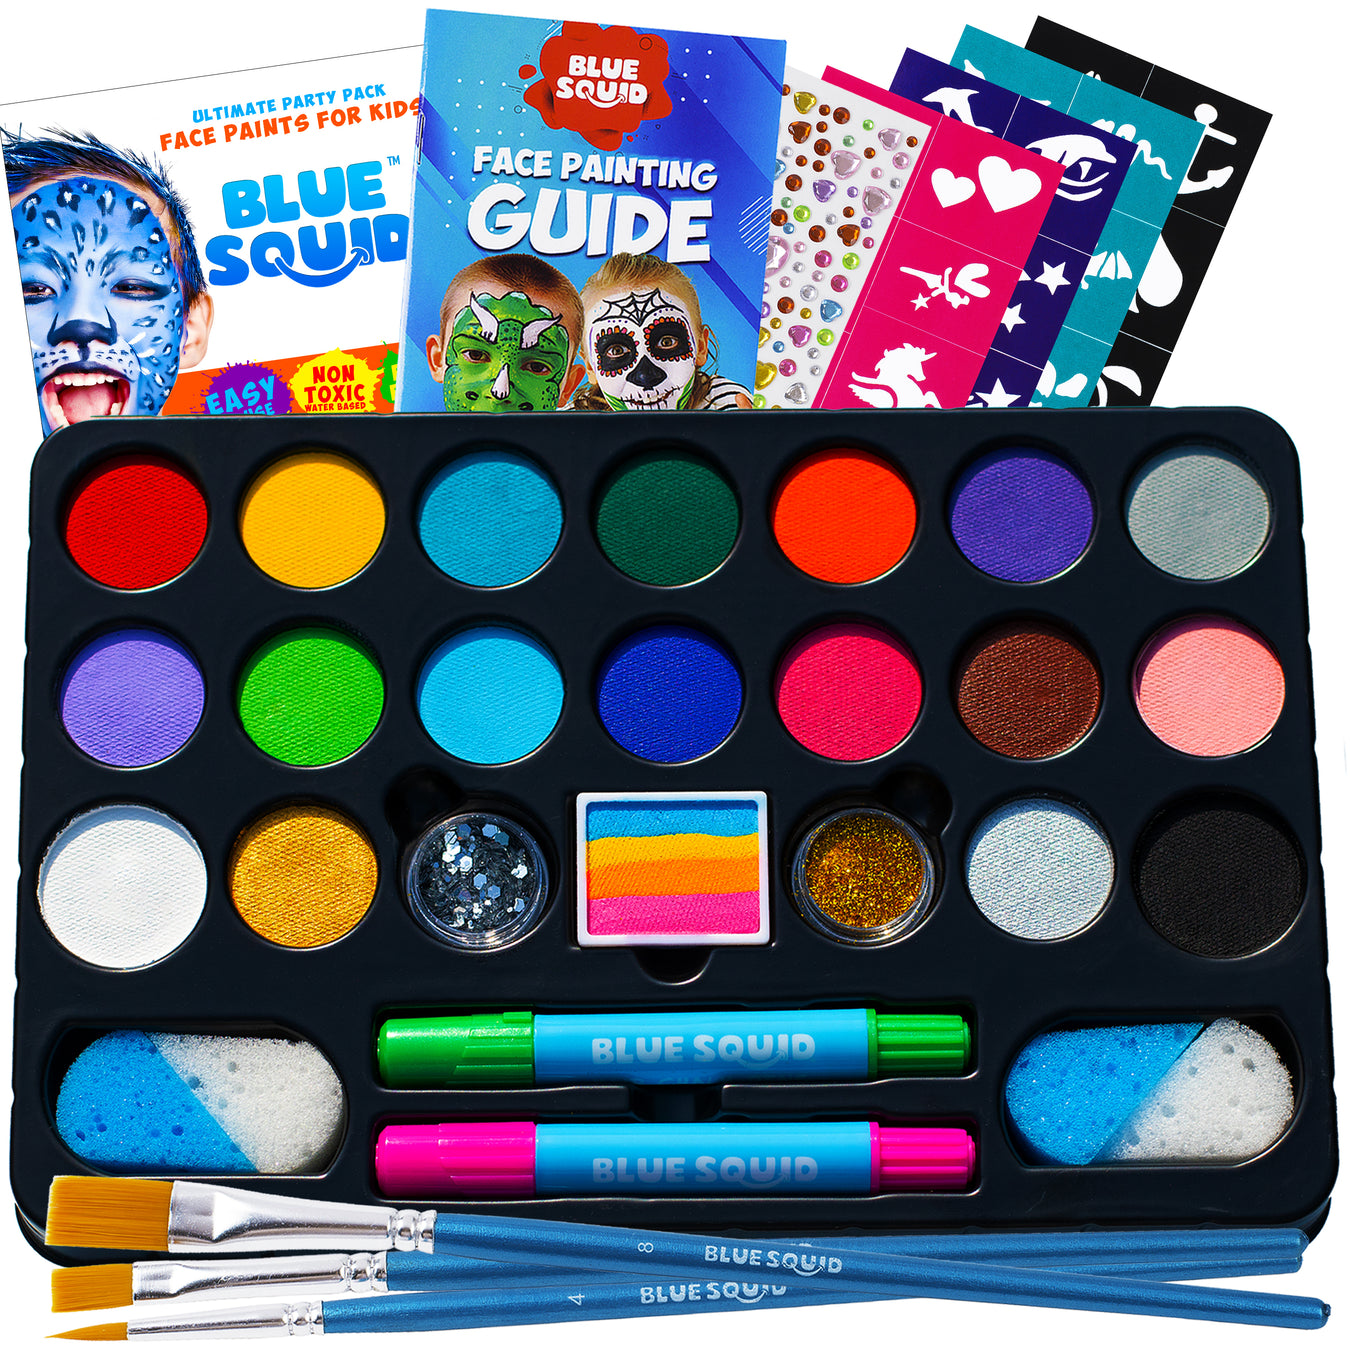 Fusion Body Art | Perfect Face Painting Kit for Professionals, Kids and Parents - Skin Safe Hypoallergenic Vegan Face Paints